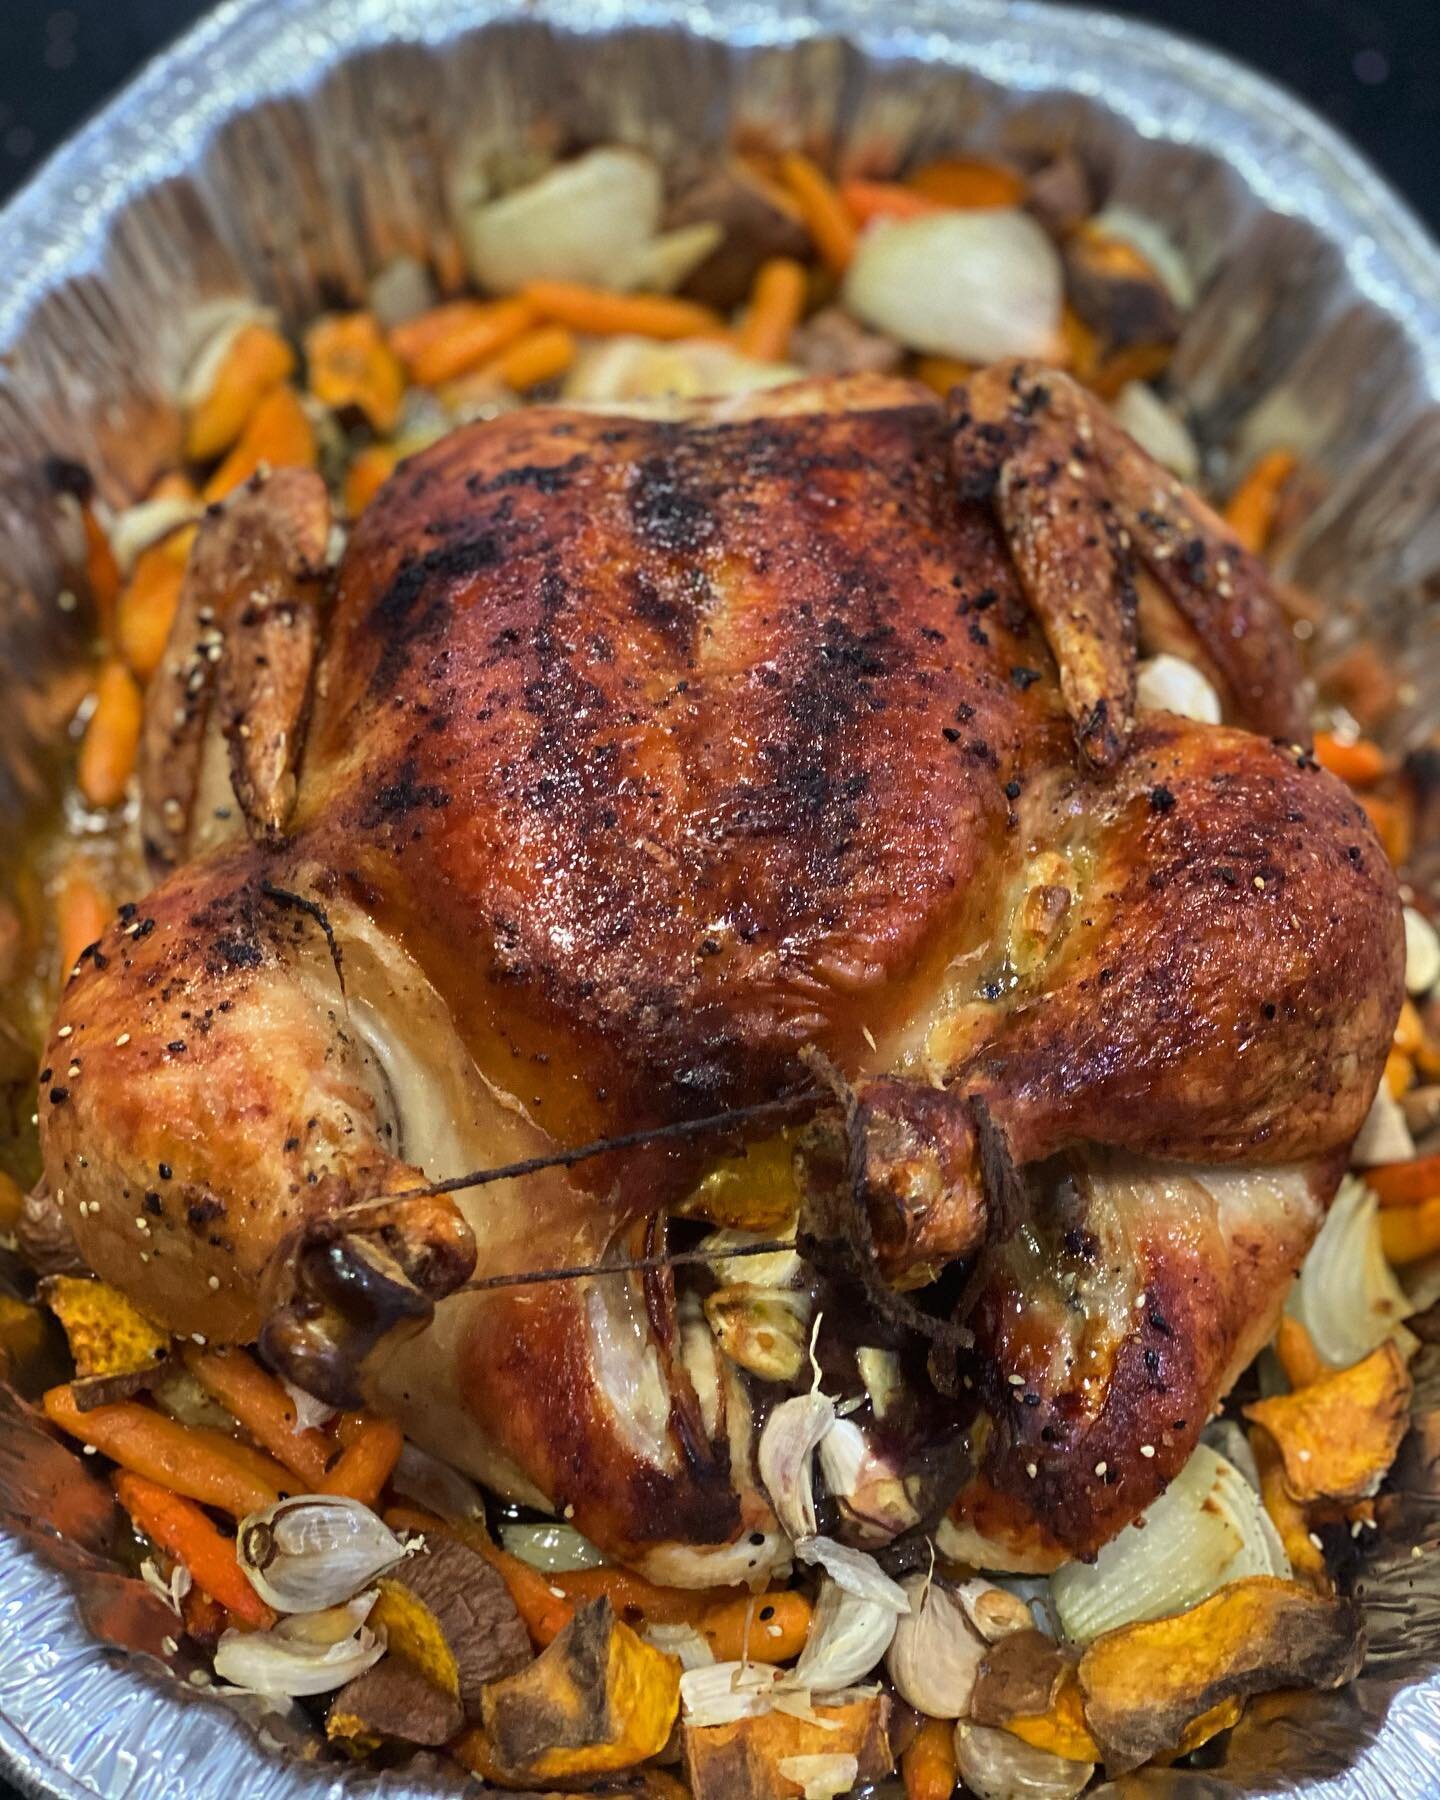 ....3 hours later 
I 👏🏻 did 👏🏻 this. 

Roasted chicken stuffed with lemon, orange, garlic and spices. Sweet potato, onion, garlic and carrots on the side. #Dinner #Is #Served 🍗 🍽🤗
.
.
.
#melissa_nutrition_ #chicken #sundaydinner #healthyeating